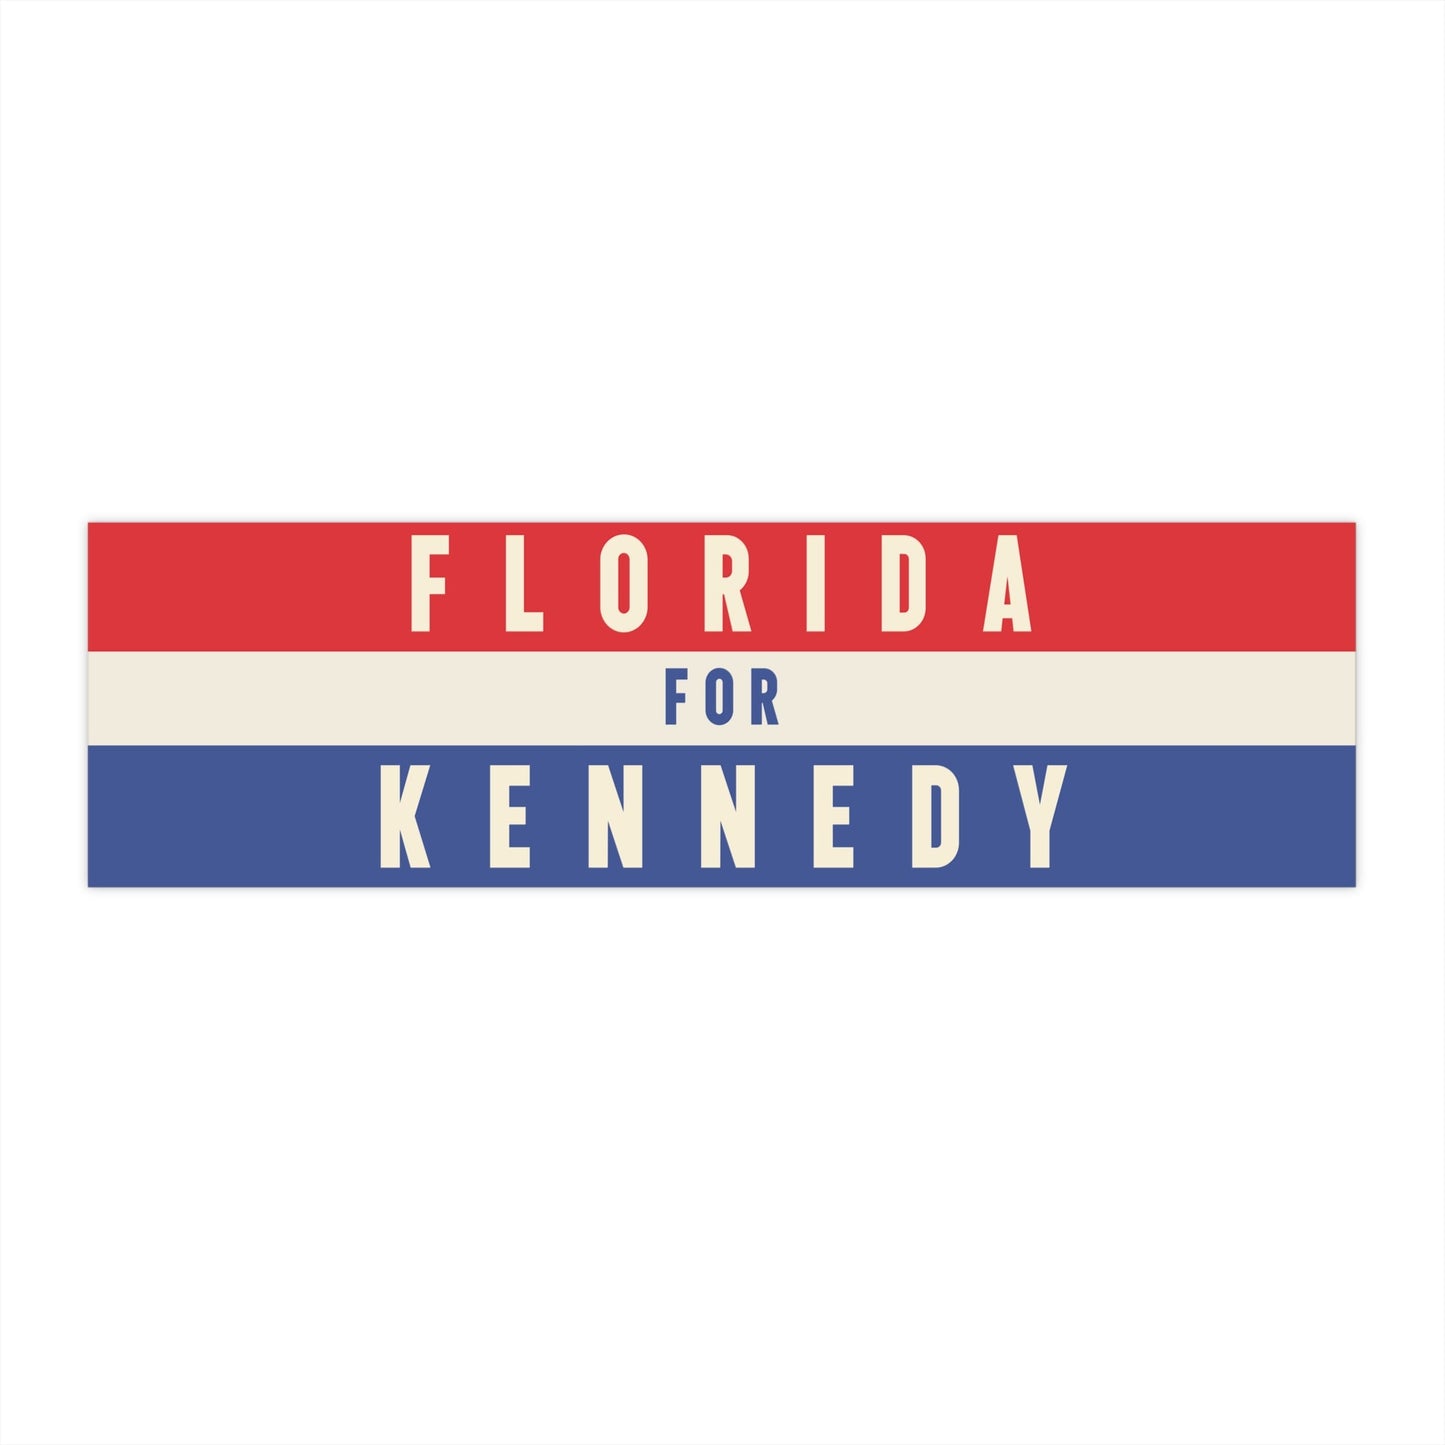 Florida for Kennedy Bumper Sticker - TEAM KENNEDY. All rights reserved